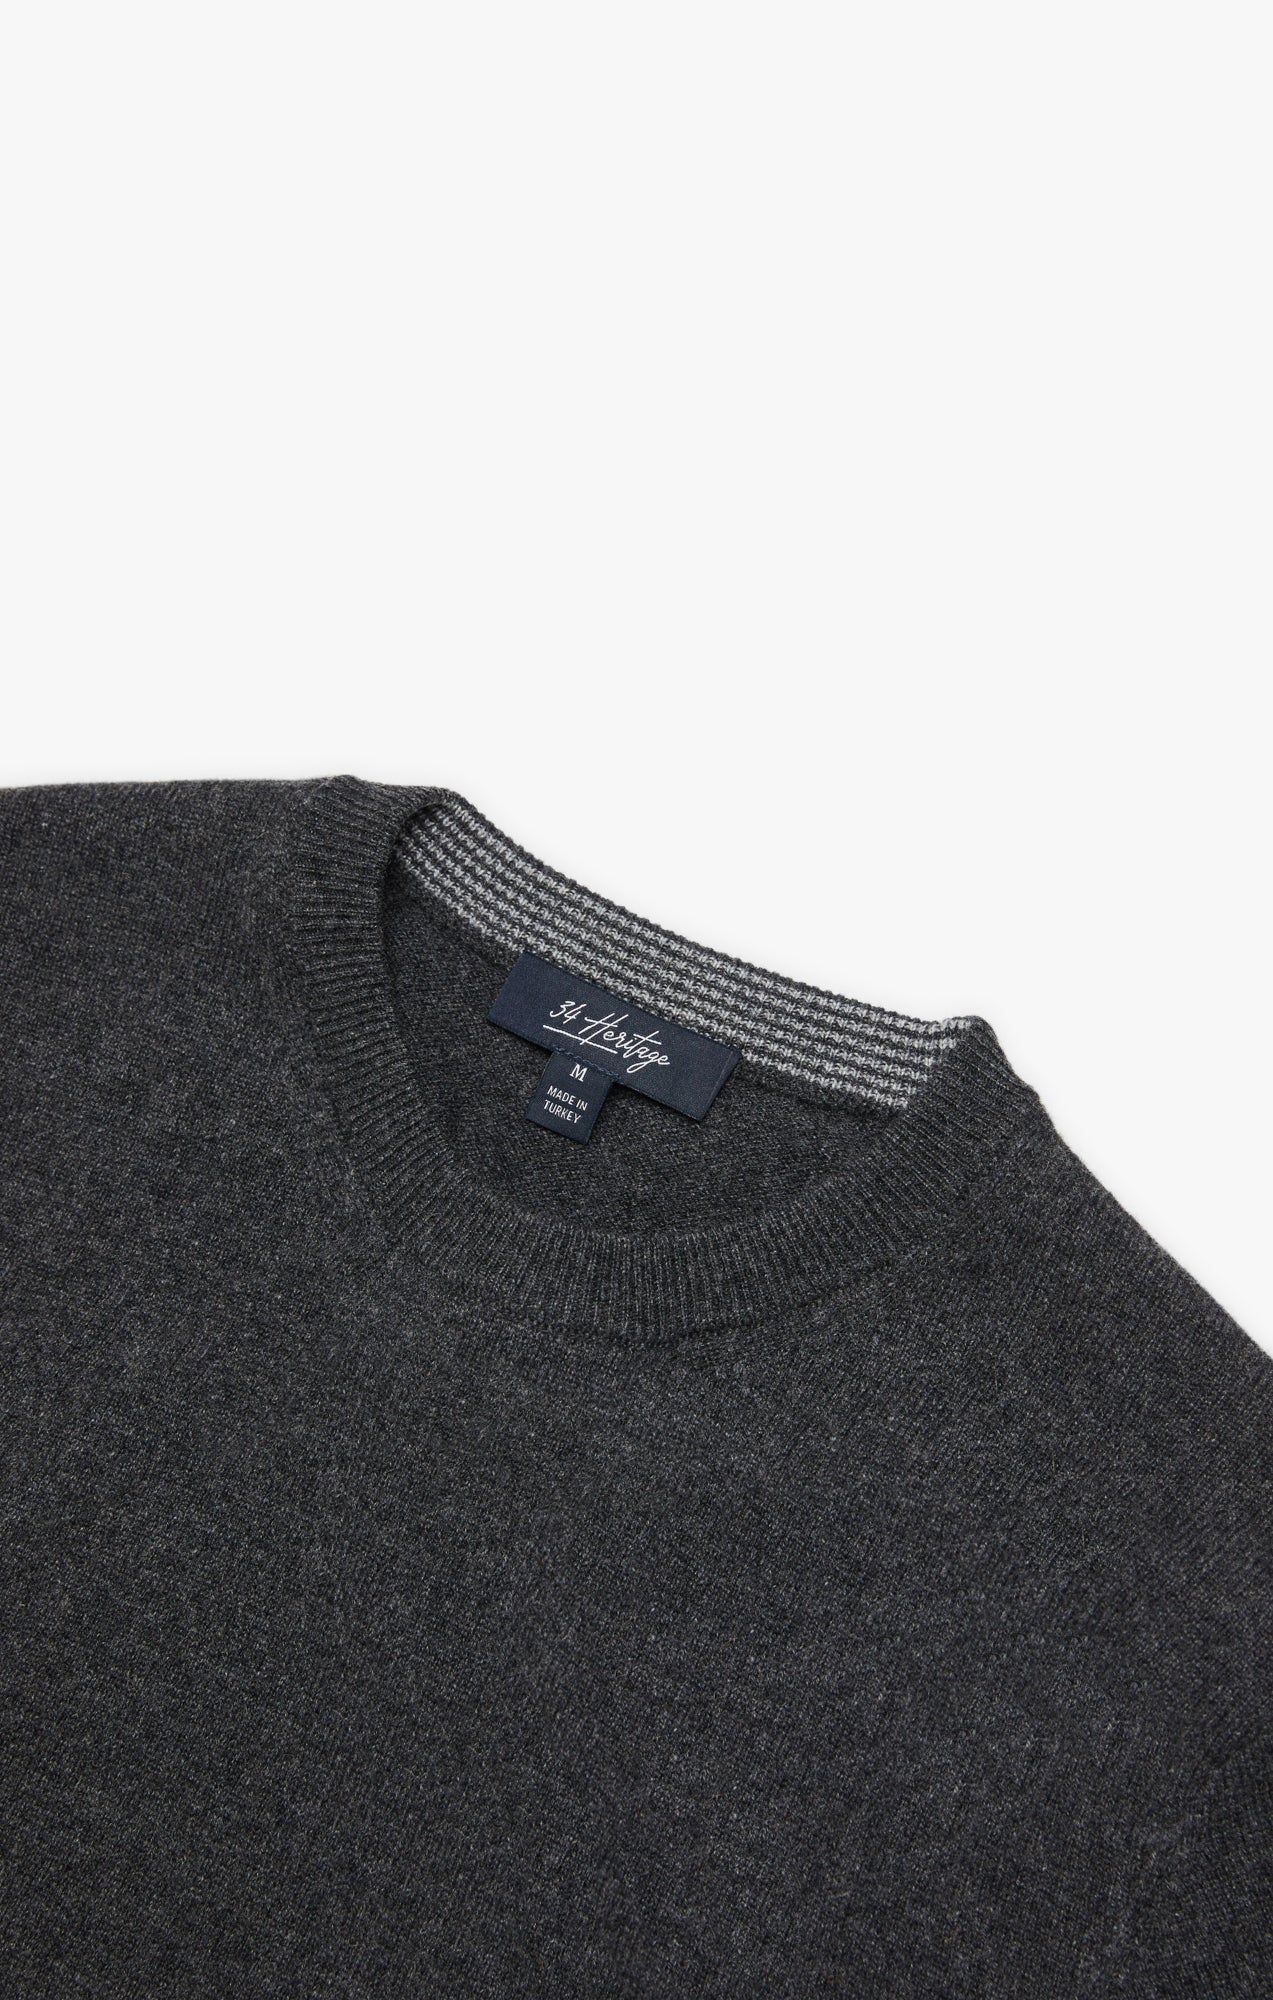 Cashmere Crew Neck Sweater In Charcoal Image 8